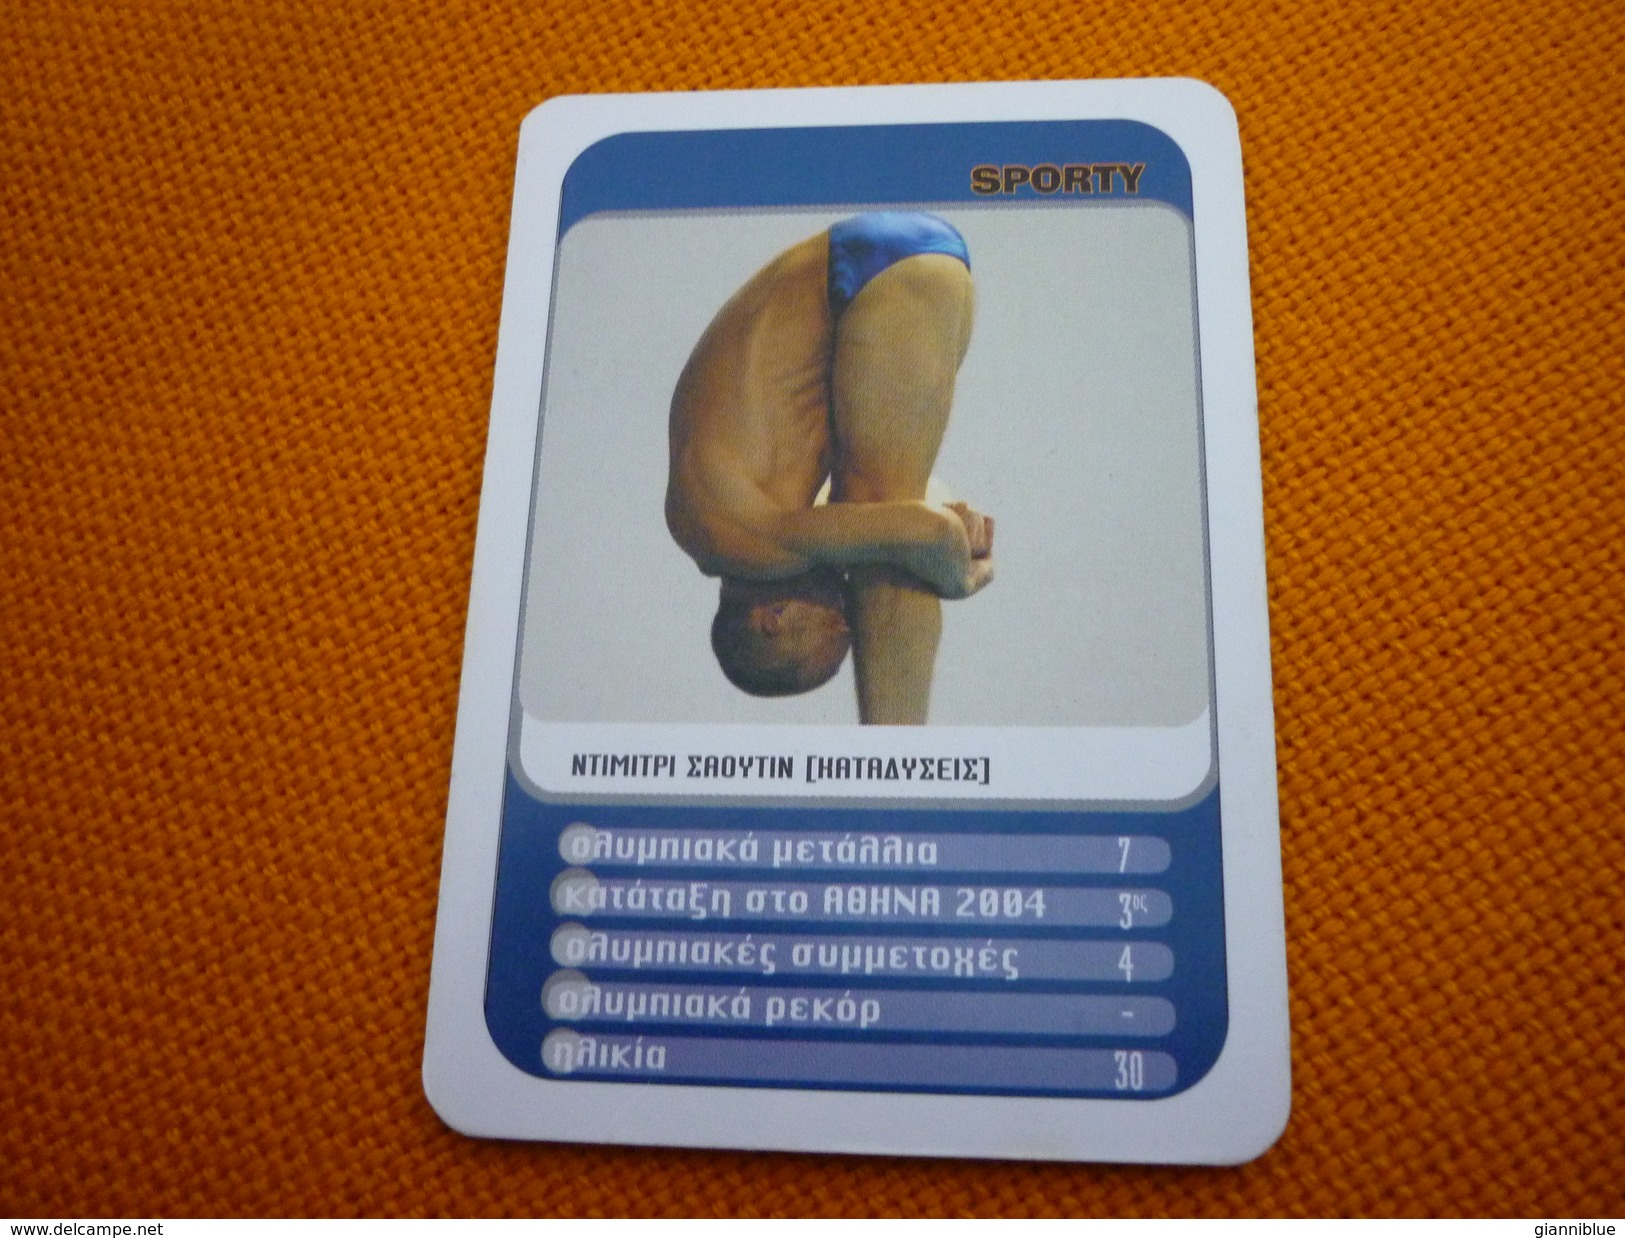 Dmitri Sautin Russian Diver Diving Athens 2004 Olympic Games Medalist Greece Greek Trading Card - Trading Cards